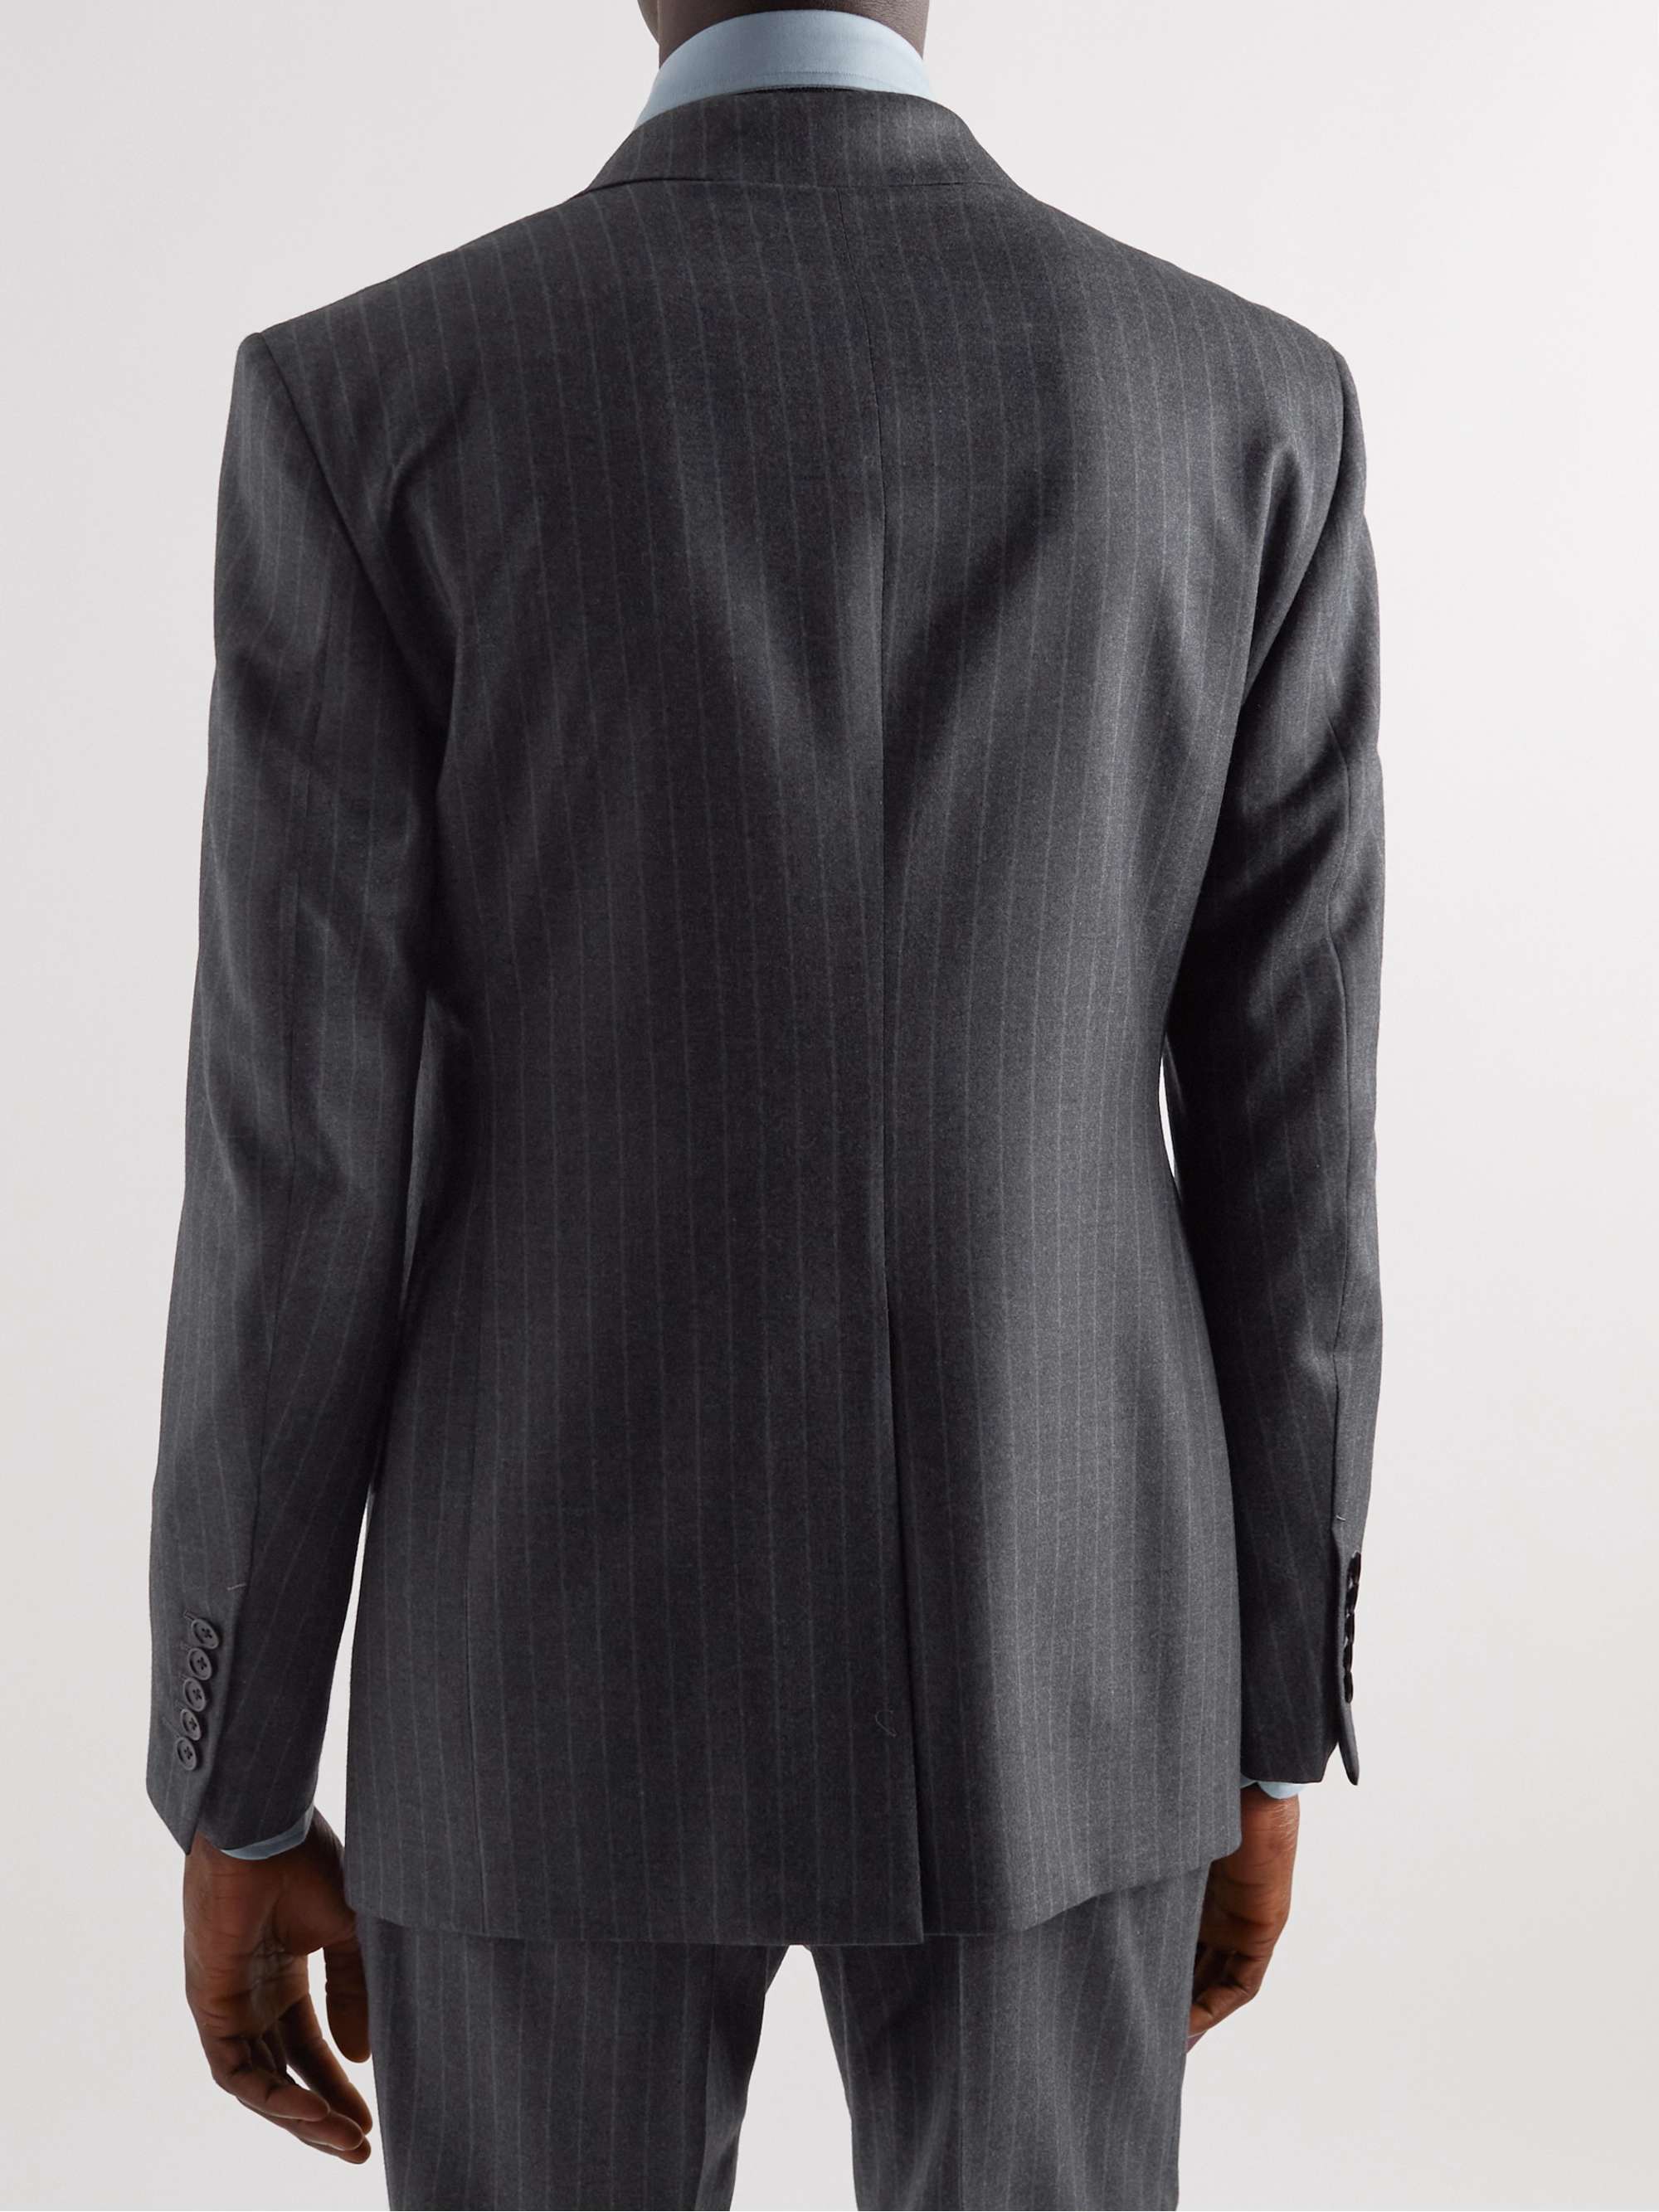 TOM FORD Double-Breasted Striped Wool and Silk-Blend Suit Jacket